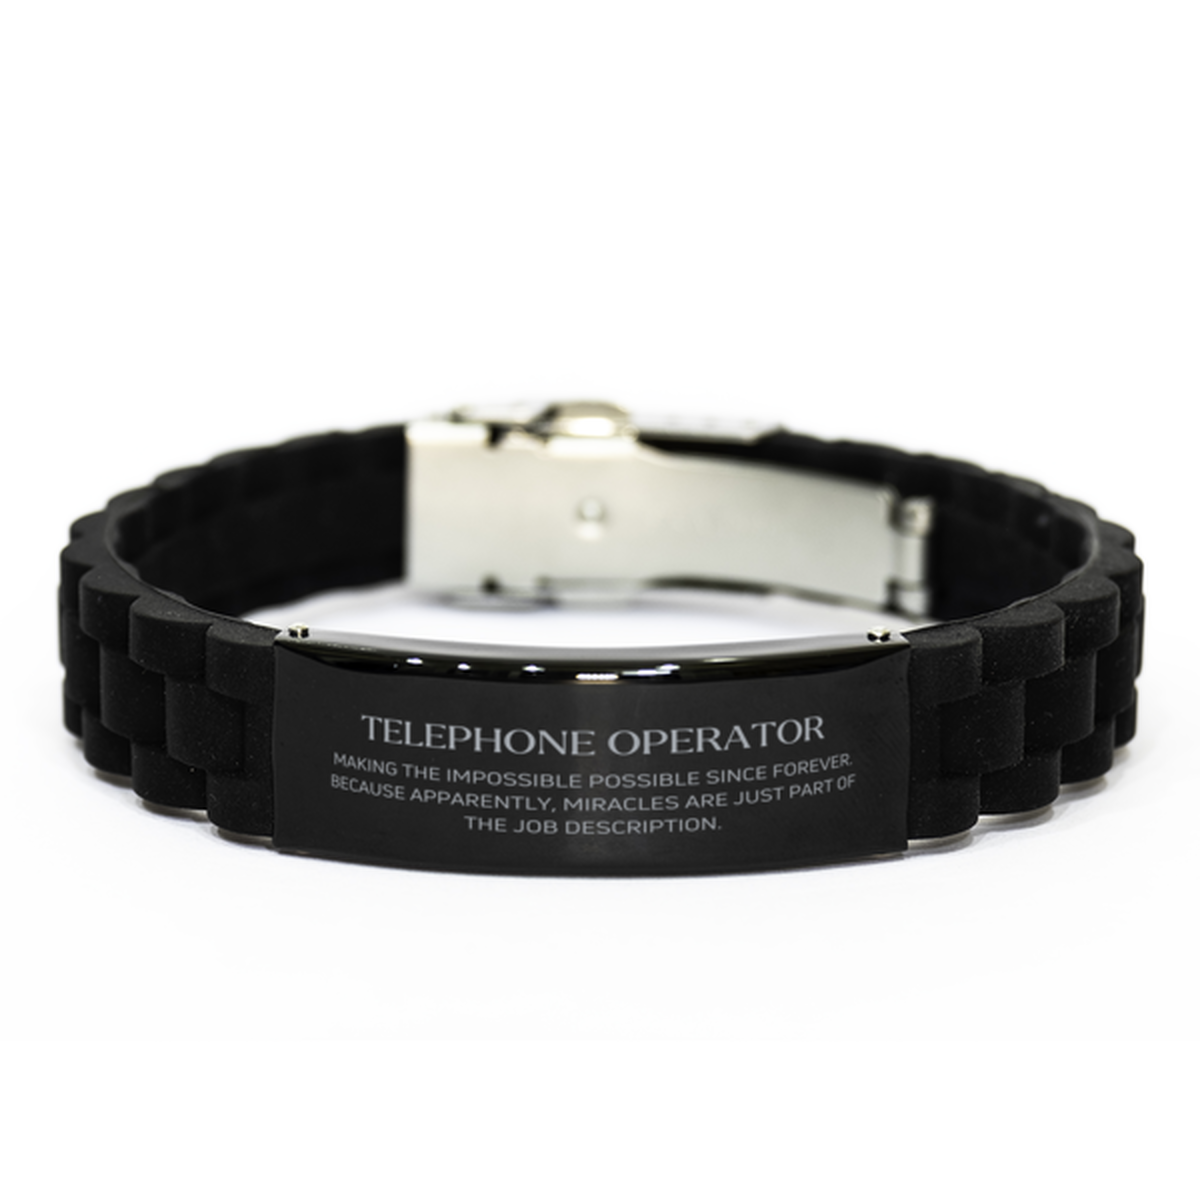 Funny Telephone Operator Gifts, Miracles are just part of the job description, Inspirational Birthday Black Glidelock Clasp Bracelet For Telephone Operator, Men, Women, Coworkers, Friends, Boss